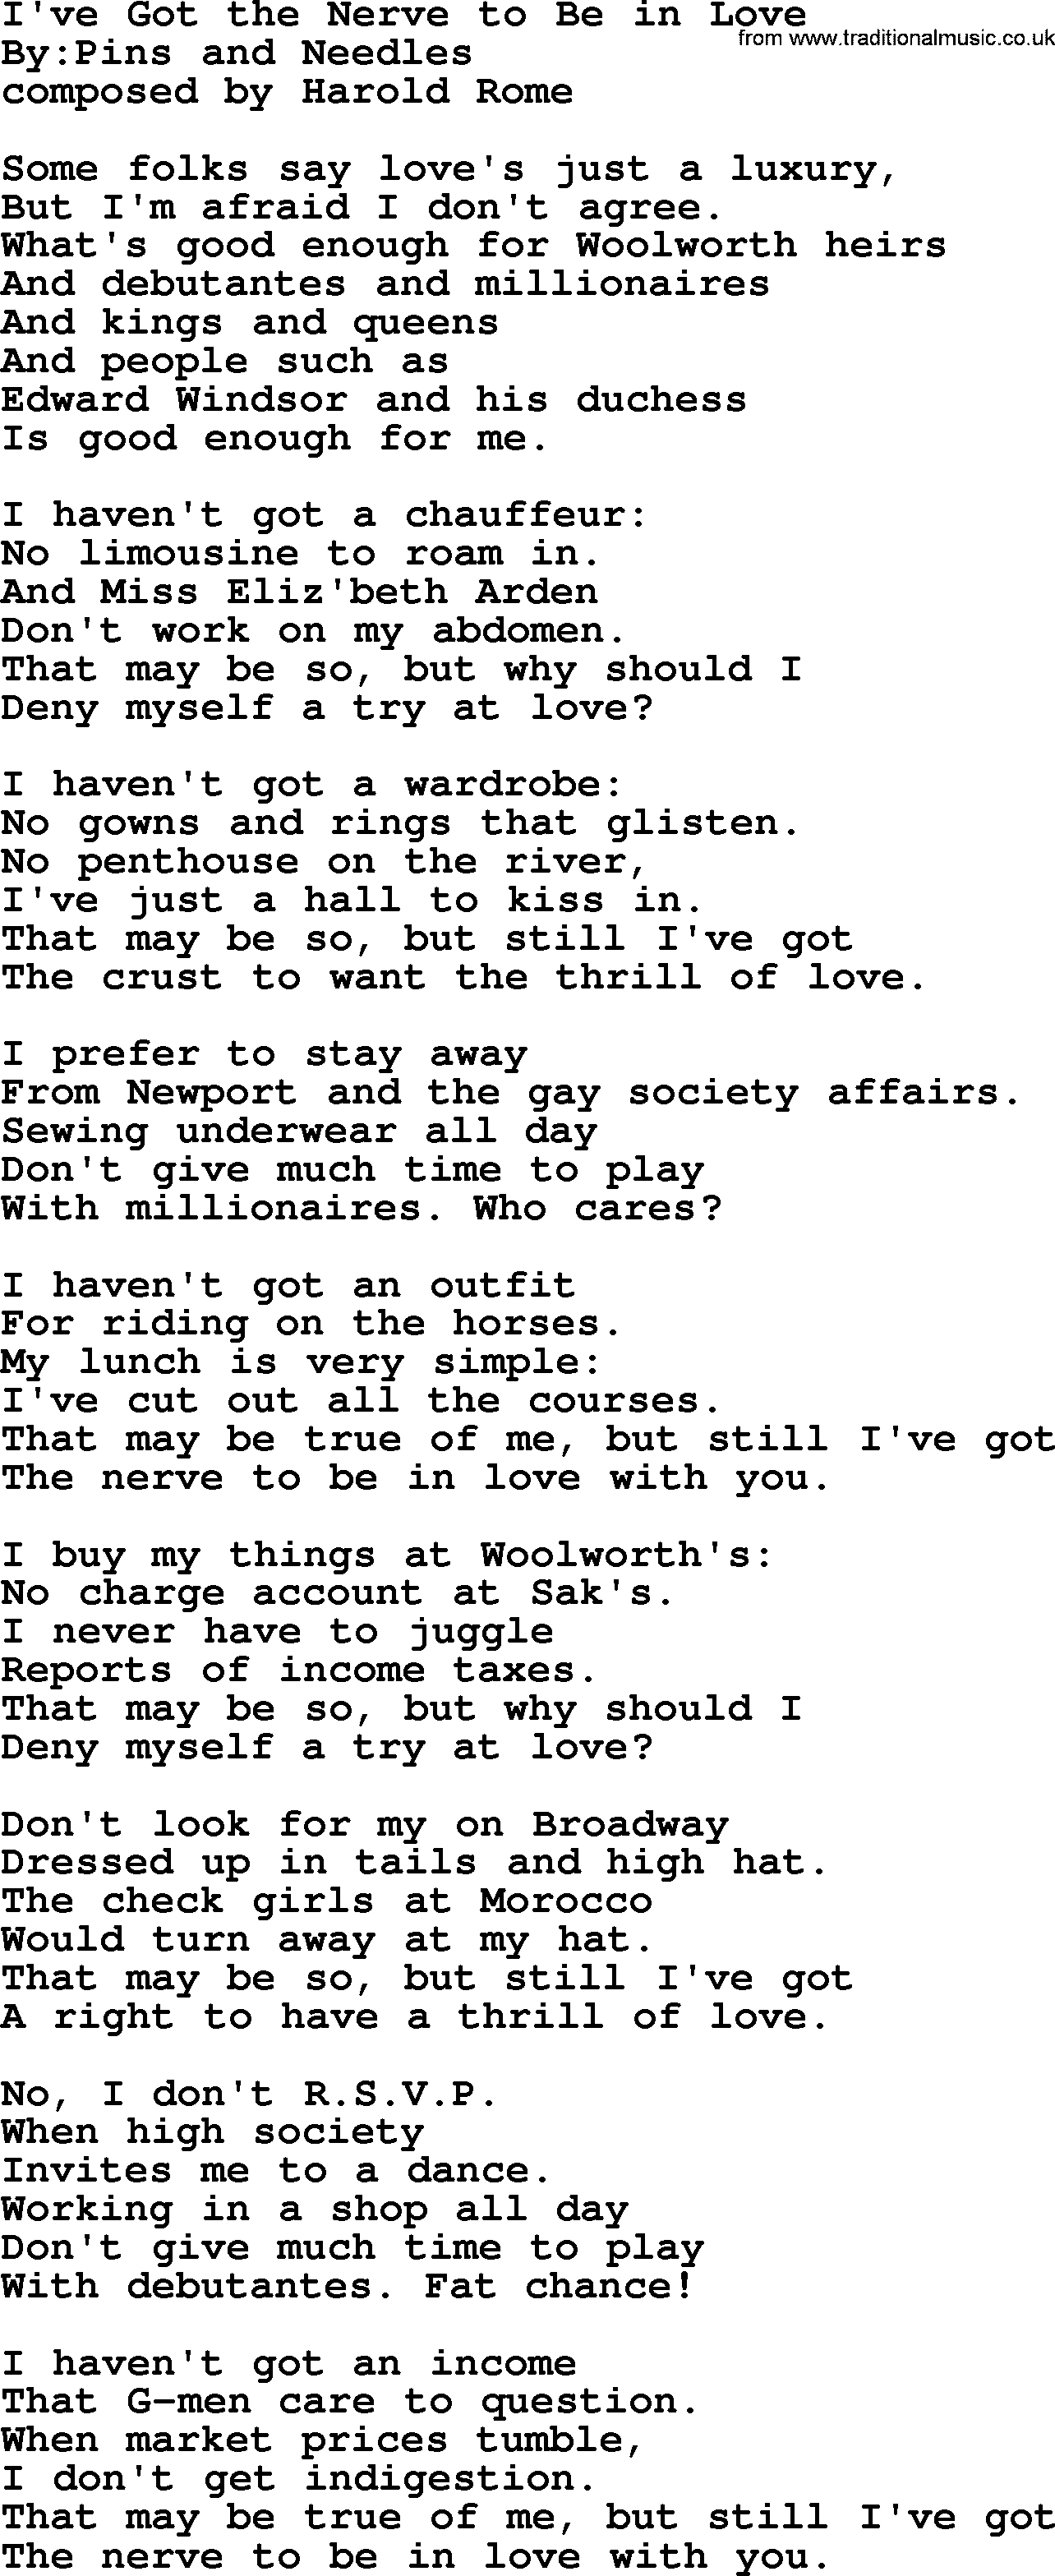 Political, Solidarity, Workers or Union song: Ive Got The Nerve To Be In Love, lyrics